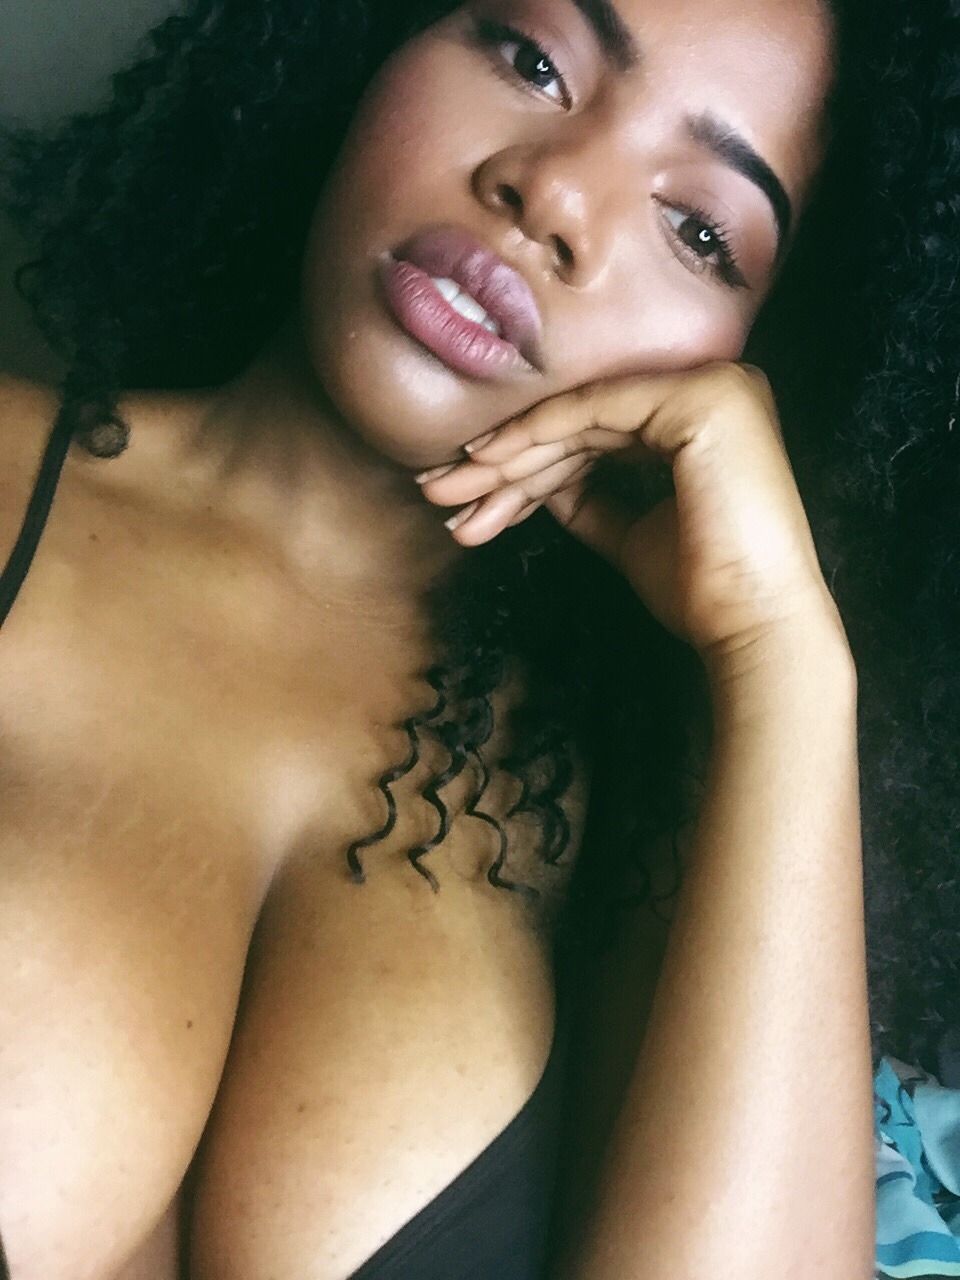 impromptu-pimpin:  11-11-1992: hallebarely:  Y'all just admire my titties please